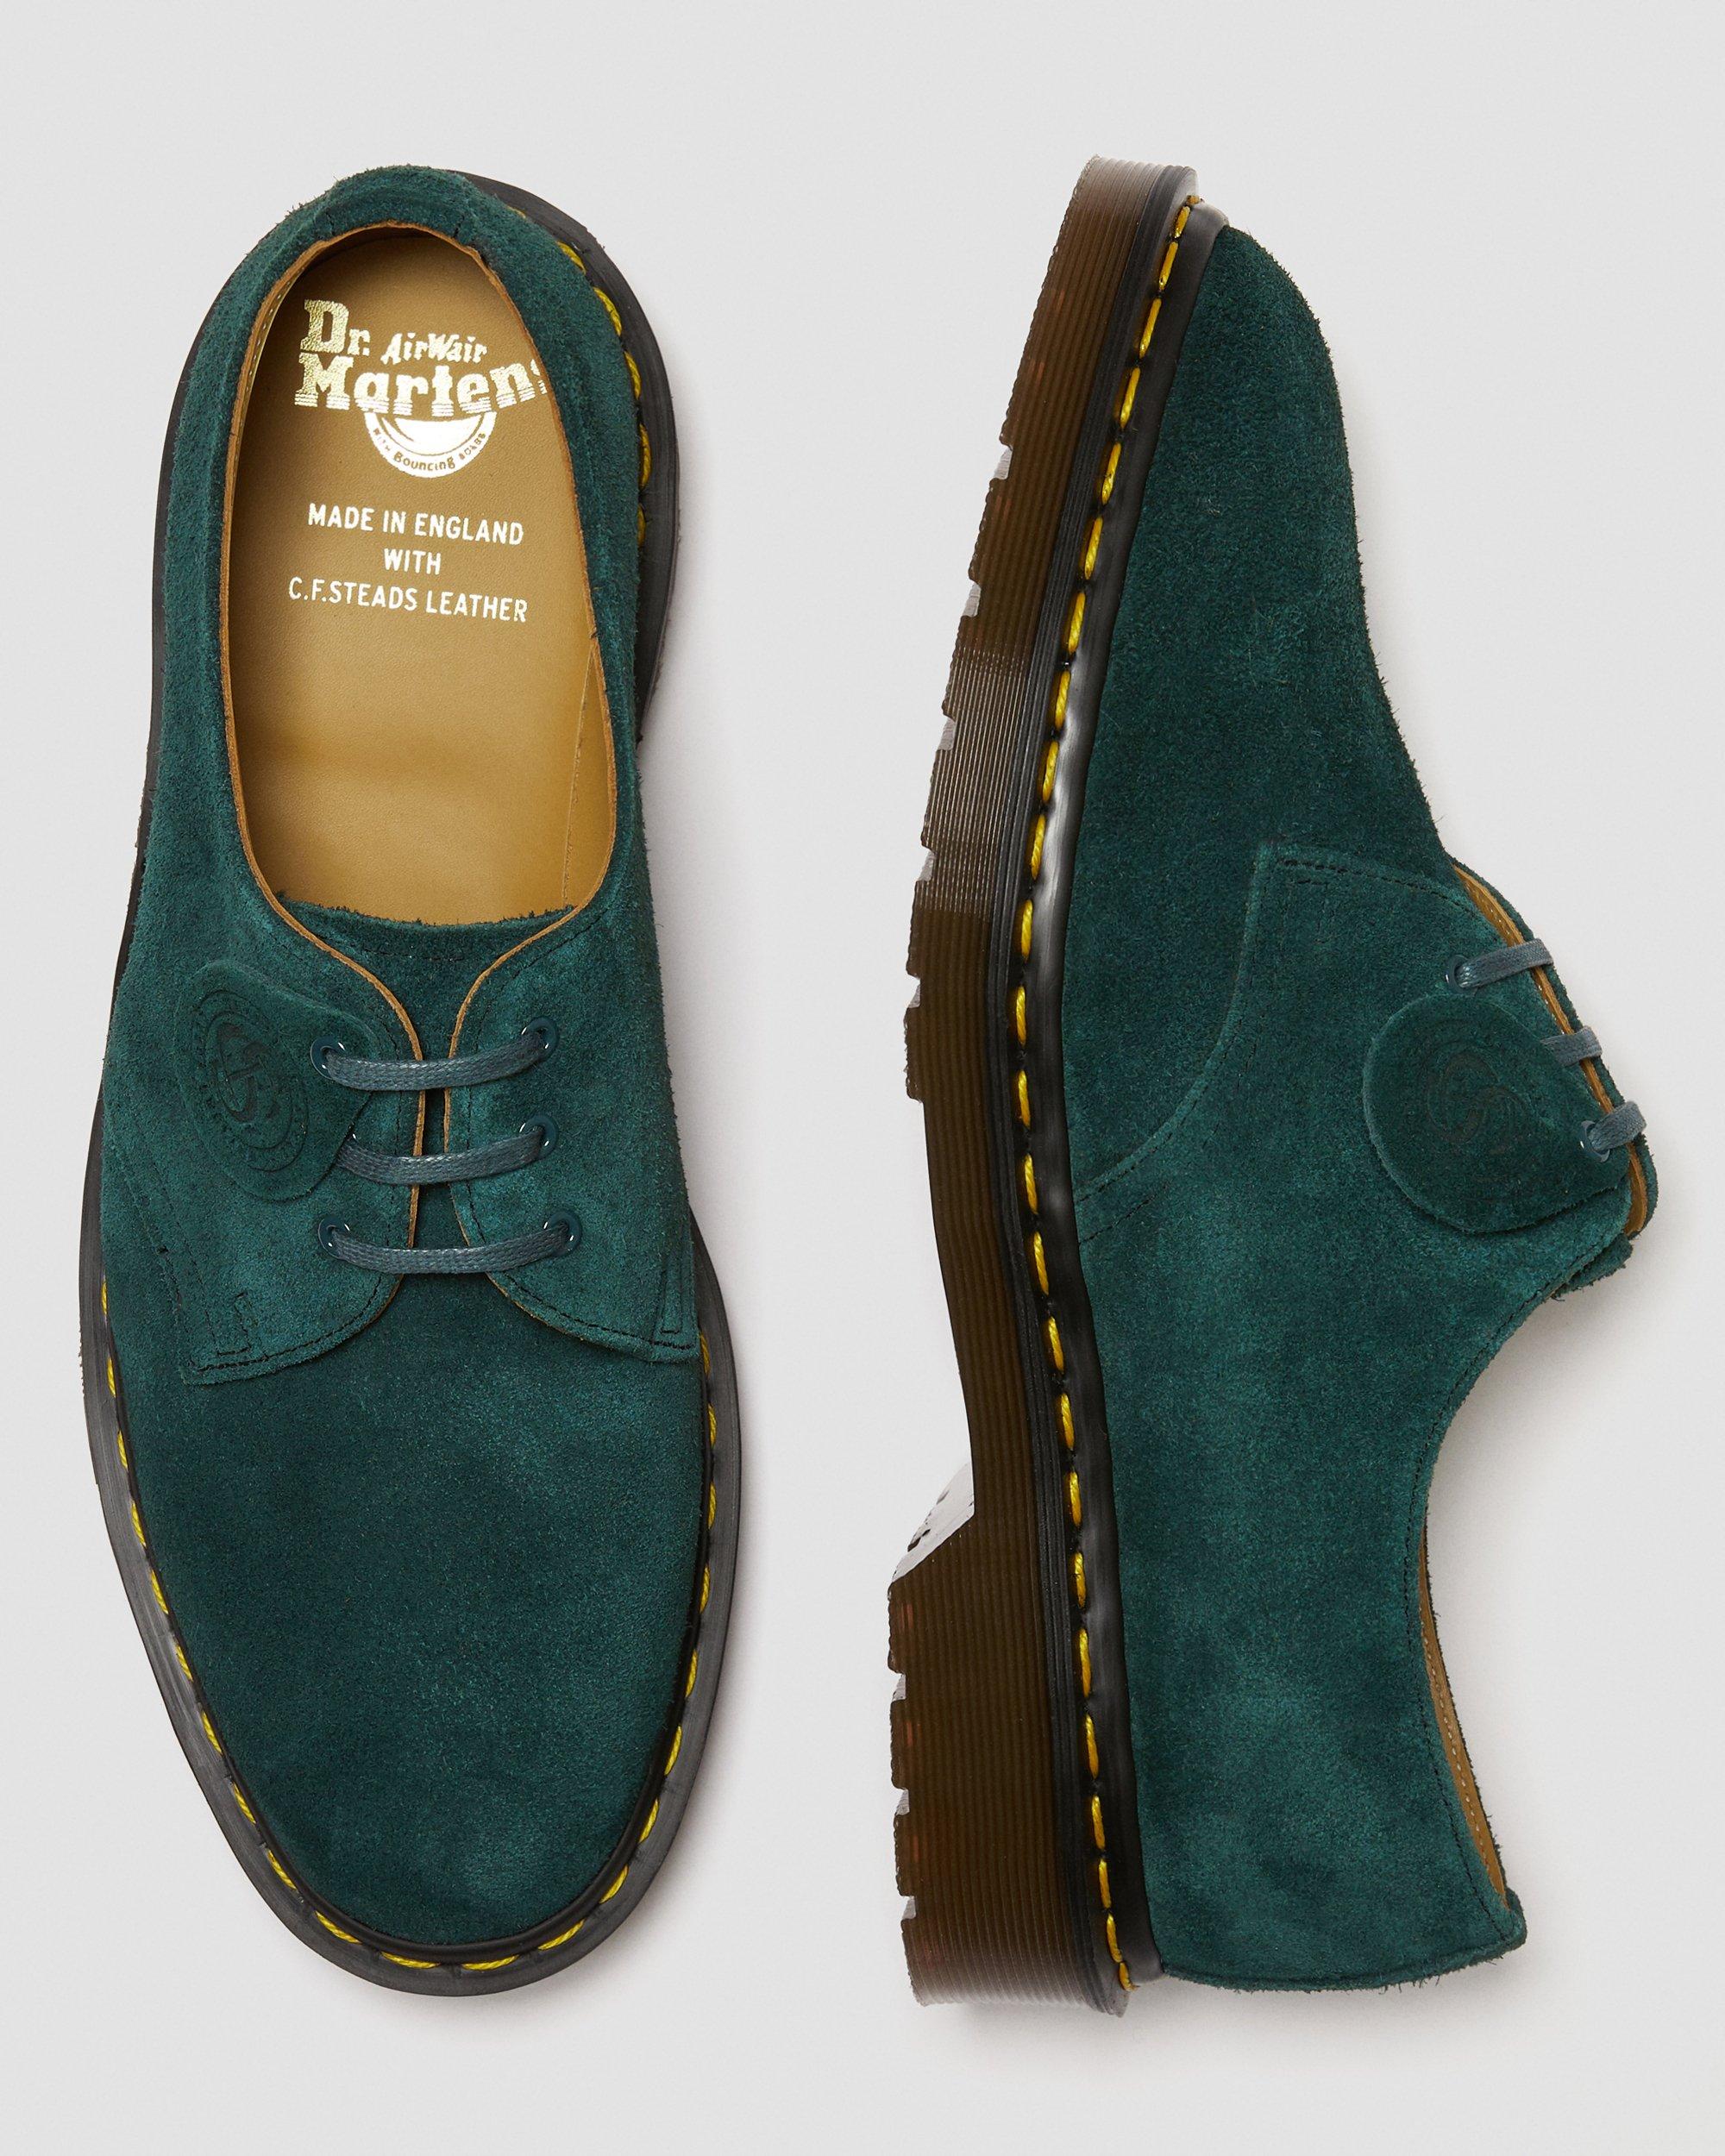 DR MARTENS 1461 Made In England Suede Oxford Shoes